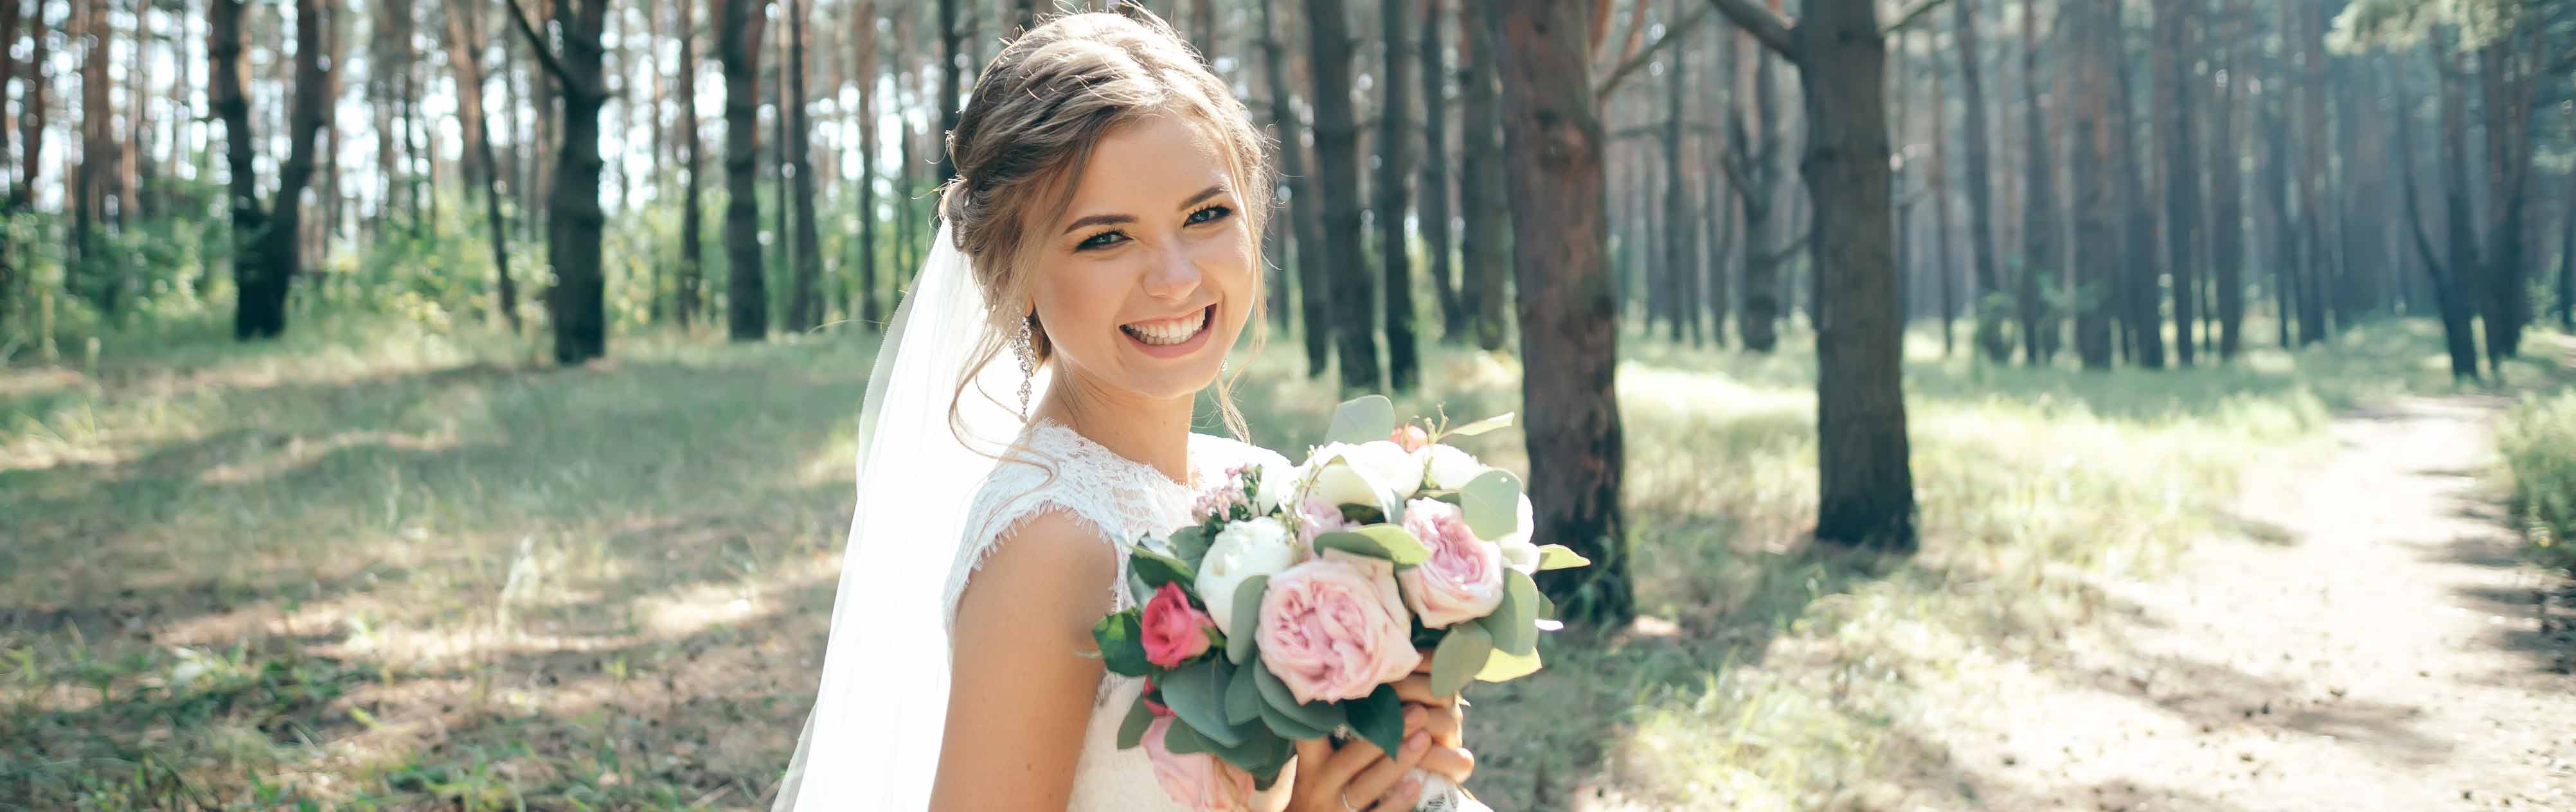 Top Tips To Beautiful Wedding Day Lashes